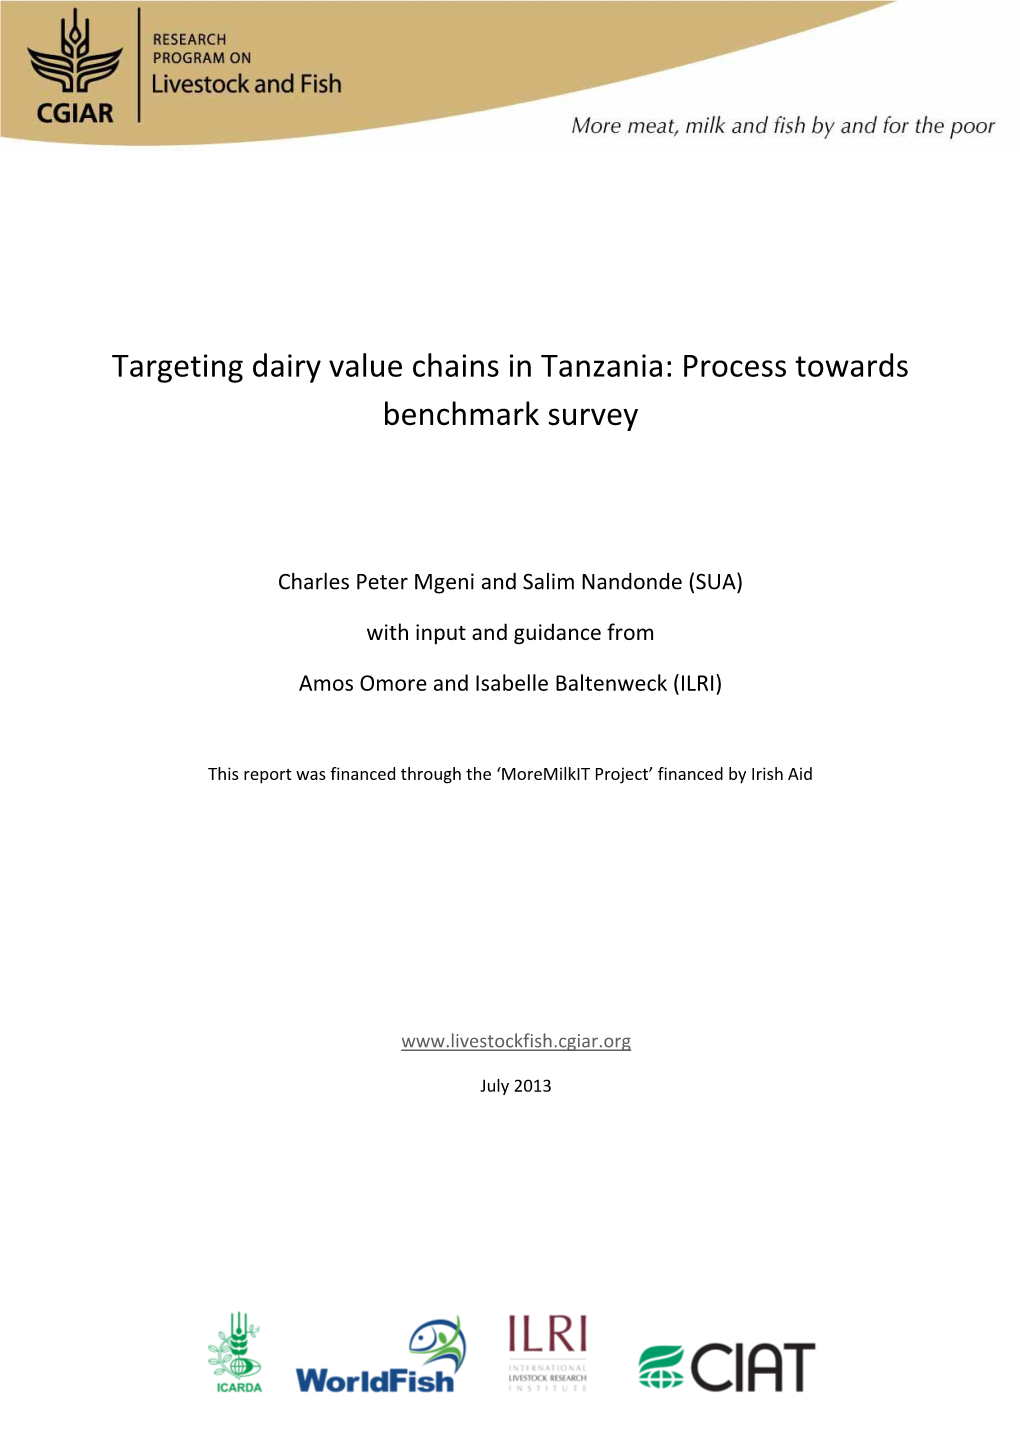 Targeting Dairy Value Chains in Tanzania: Process Towards Benchmark Survey